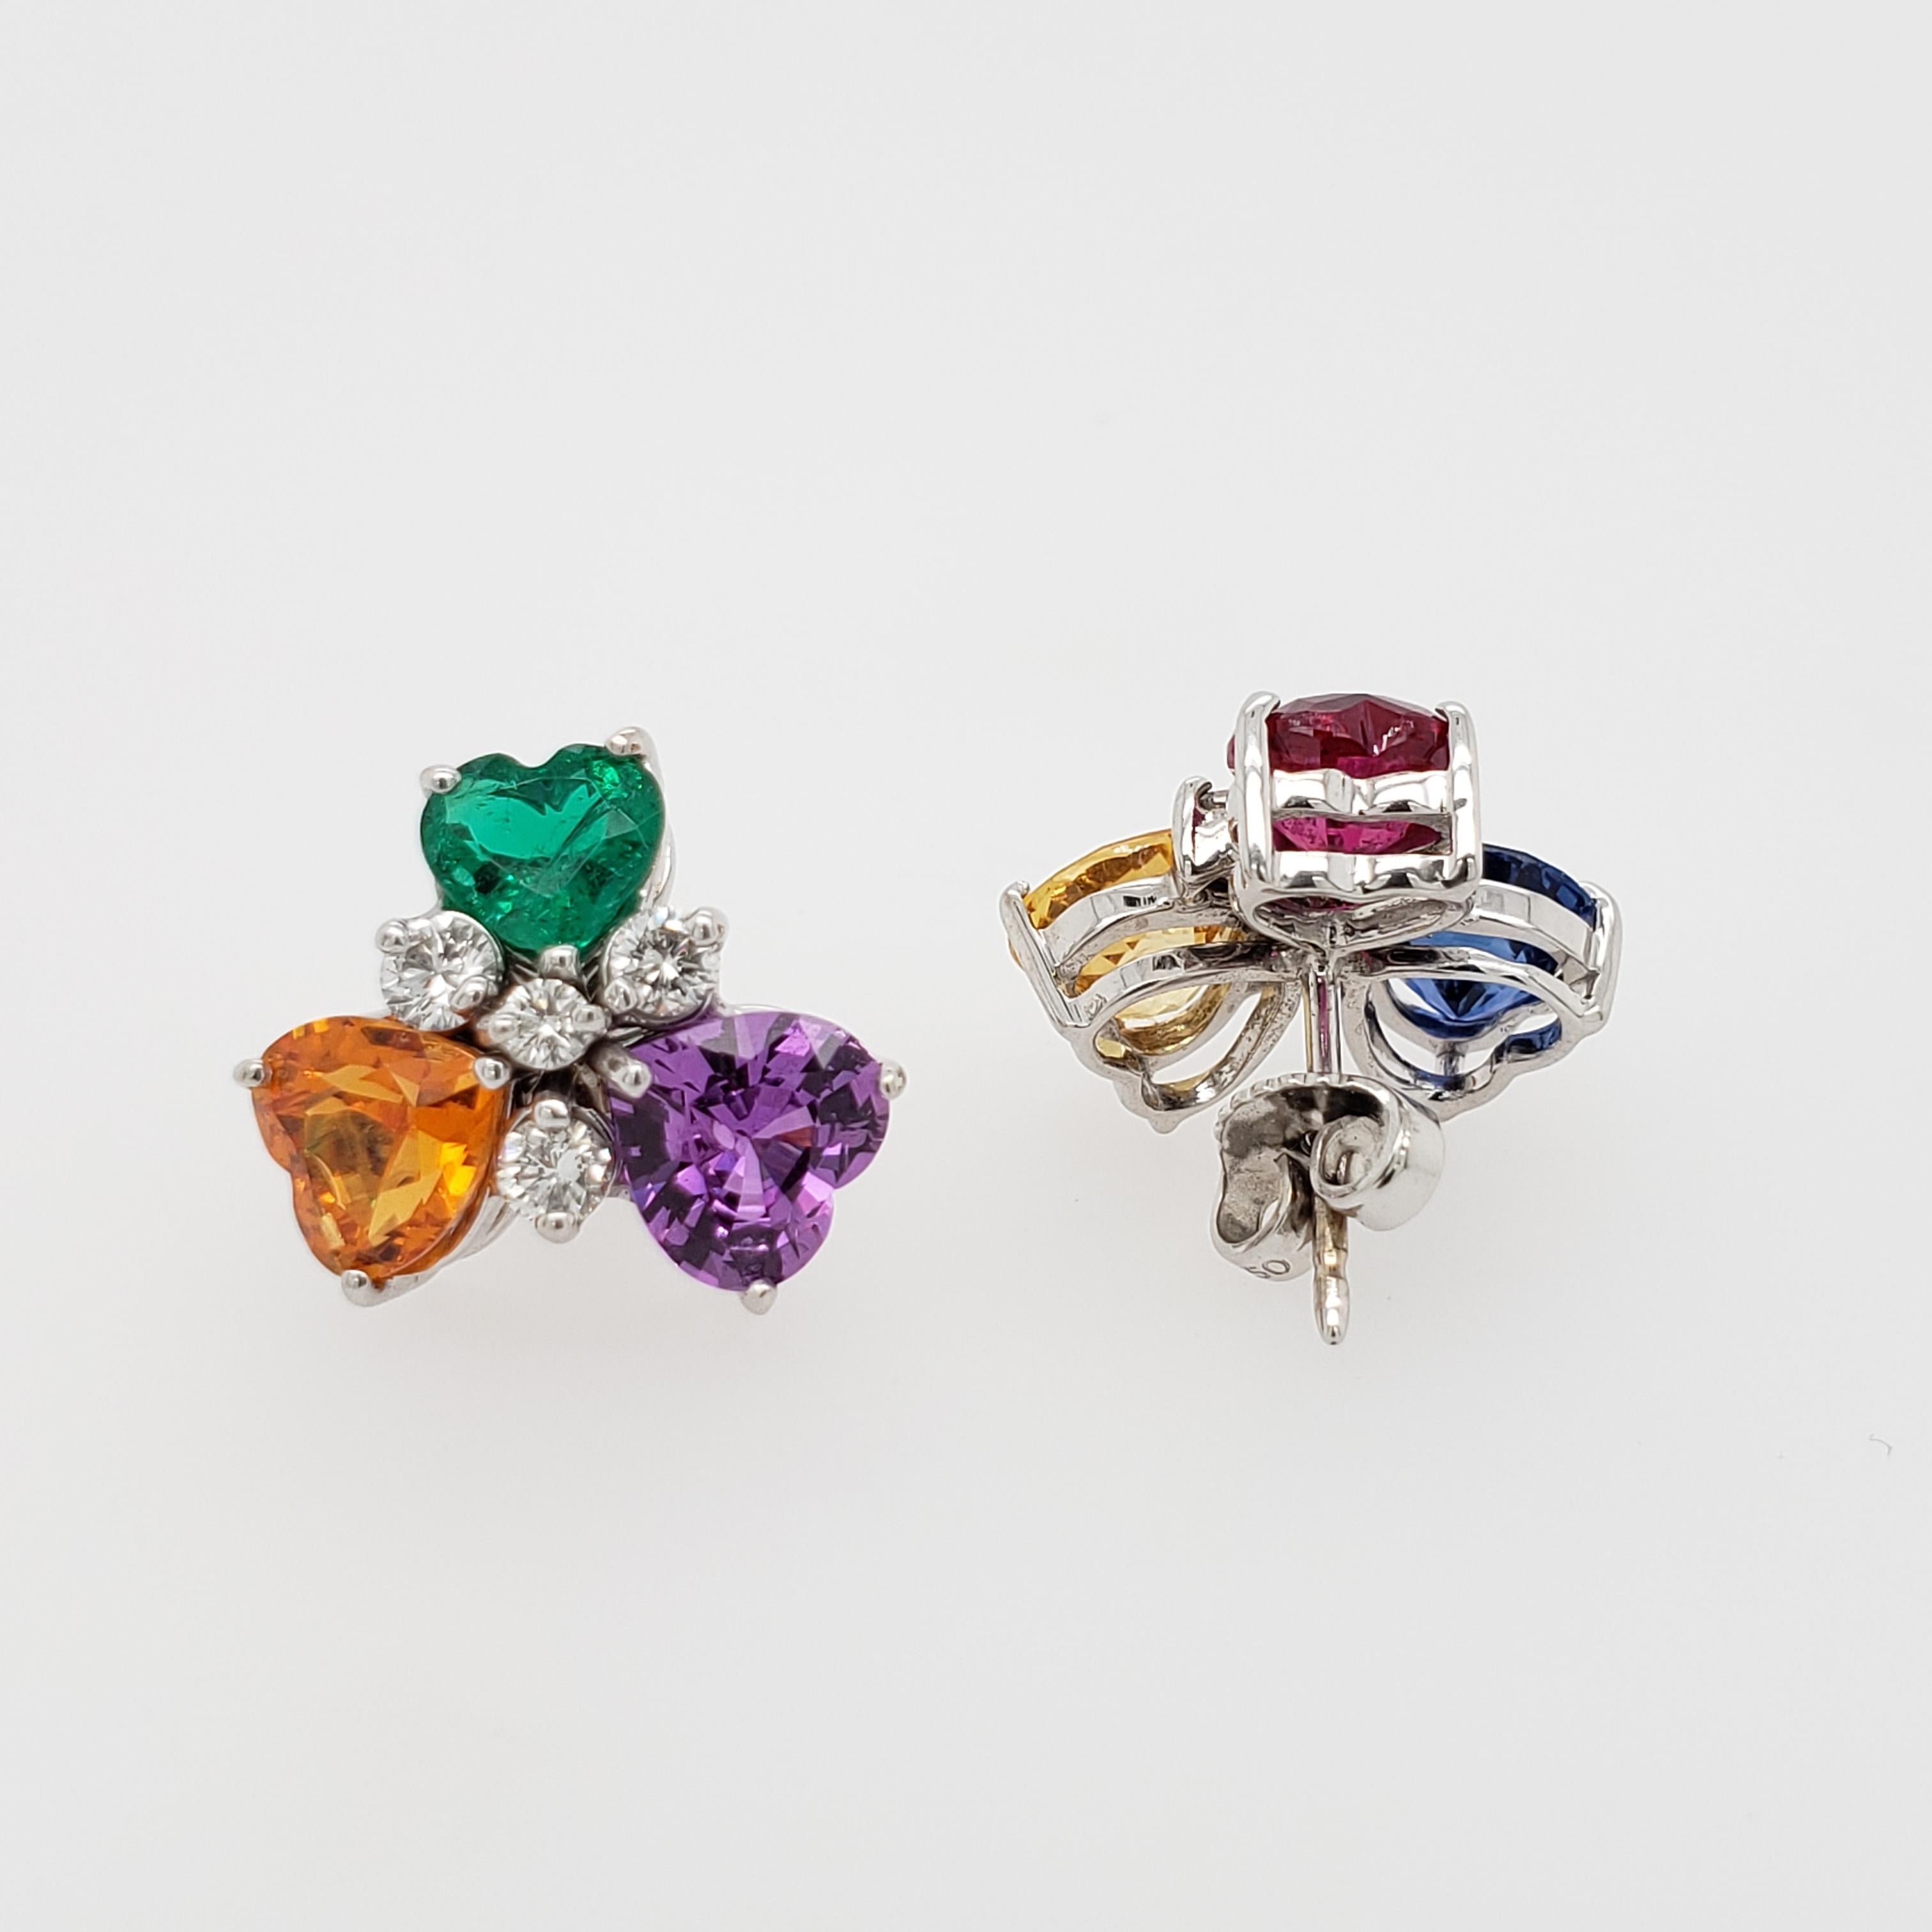 18kt White Gold stud earrings. Multi-colored sapphires, emerald, ruby, & diamonds. The heart shaped blue sapphire weighs 1.25 carats, the yellow sapphire weighs 1.29 carats, the orange sapphire weighs 1.29 carats, the purple sapphire weighs 1.63